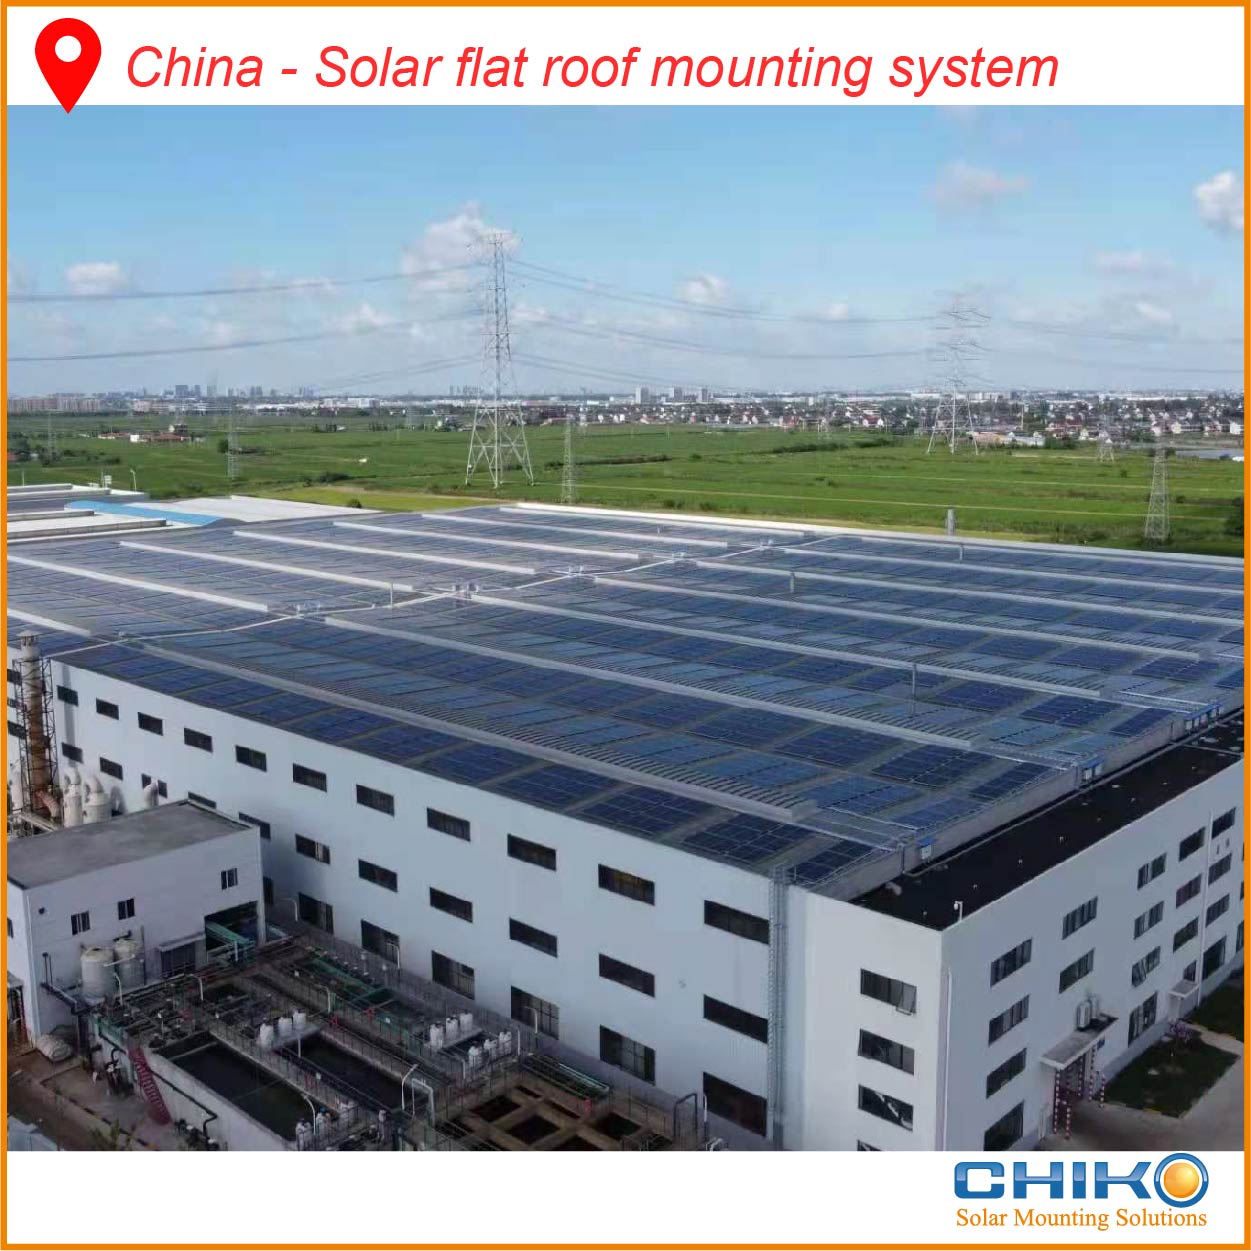 Tips for you reference---- Qickly estimate the efficient installation area of solar mounting system!